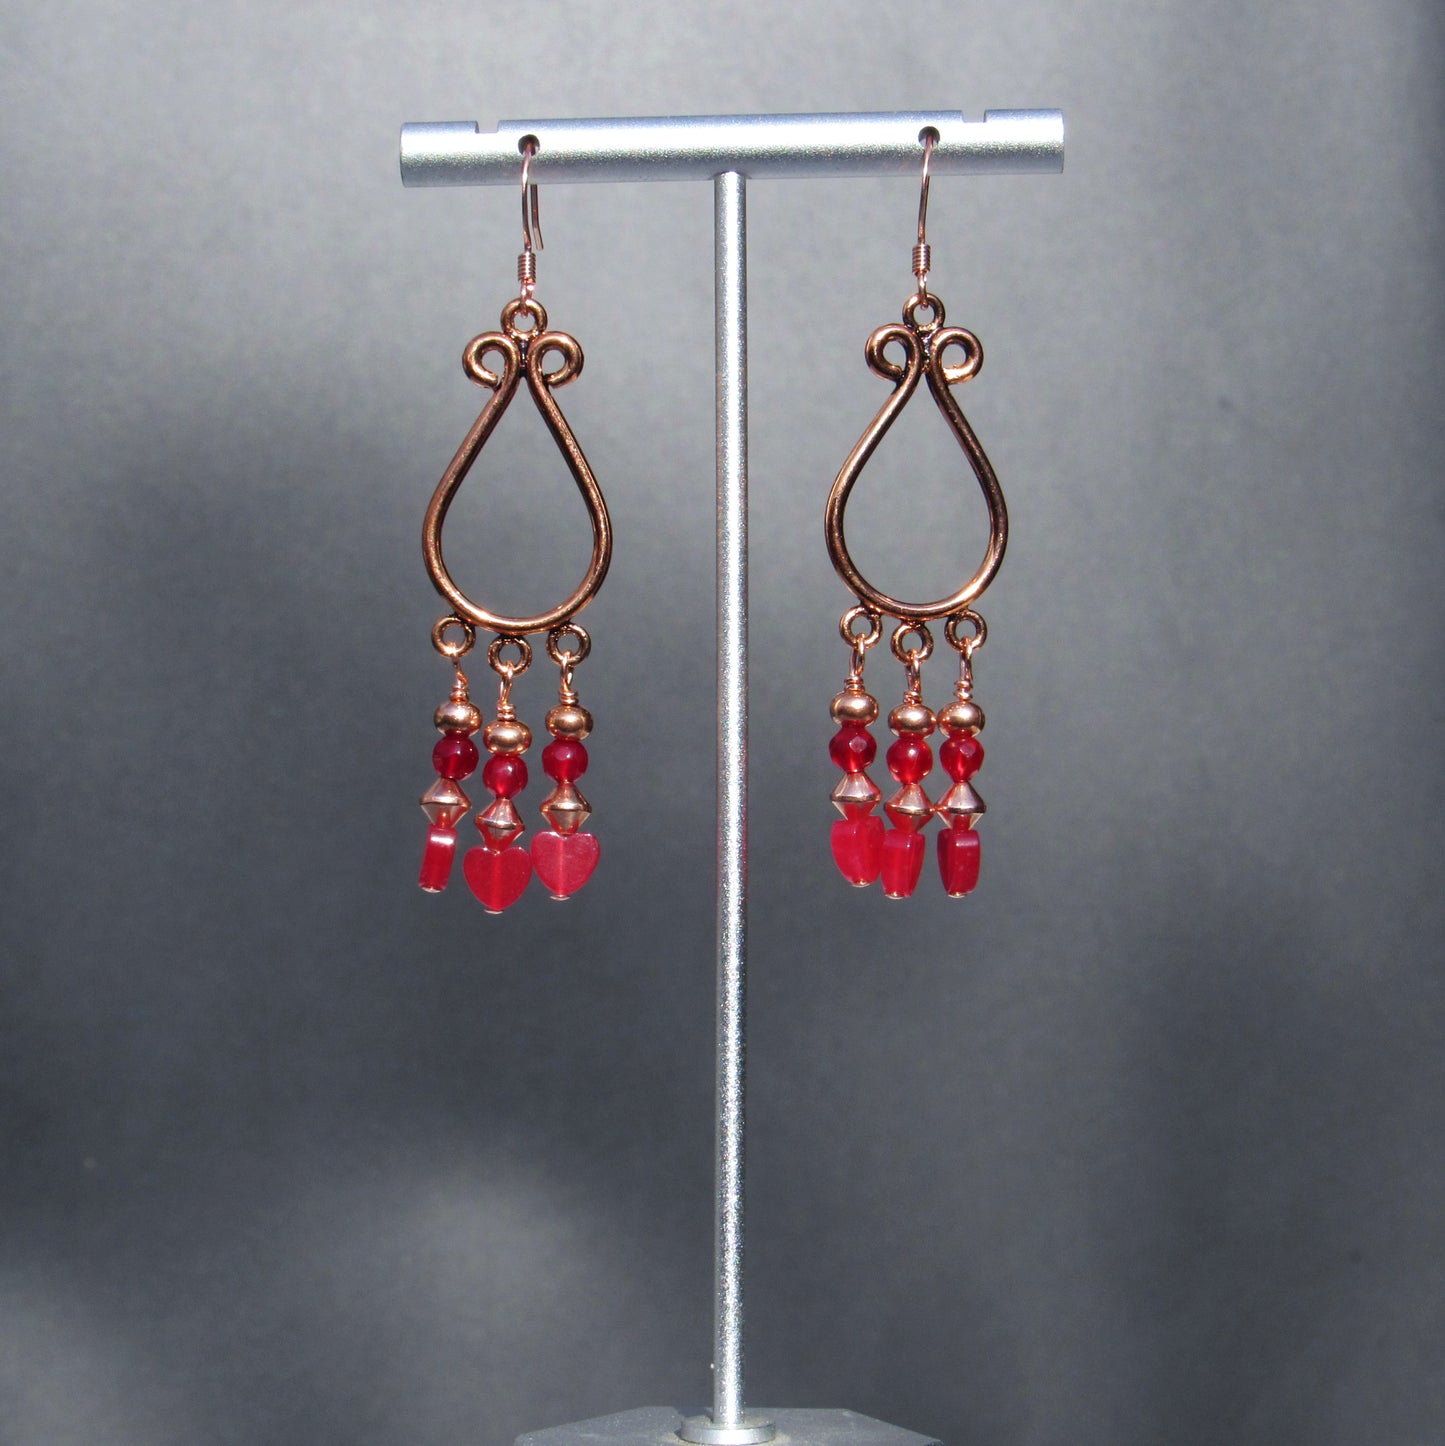 Jade gemstone hearts, Red agates, and copper chandelier earrings